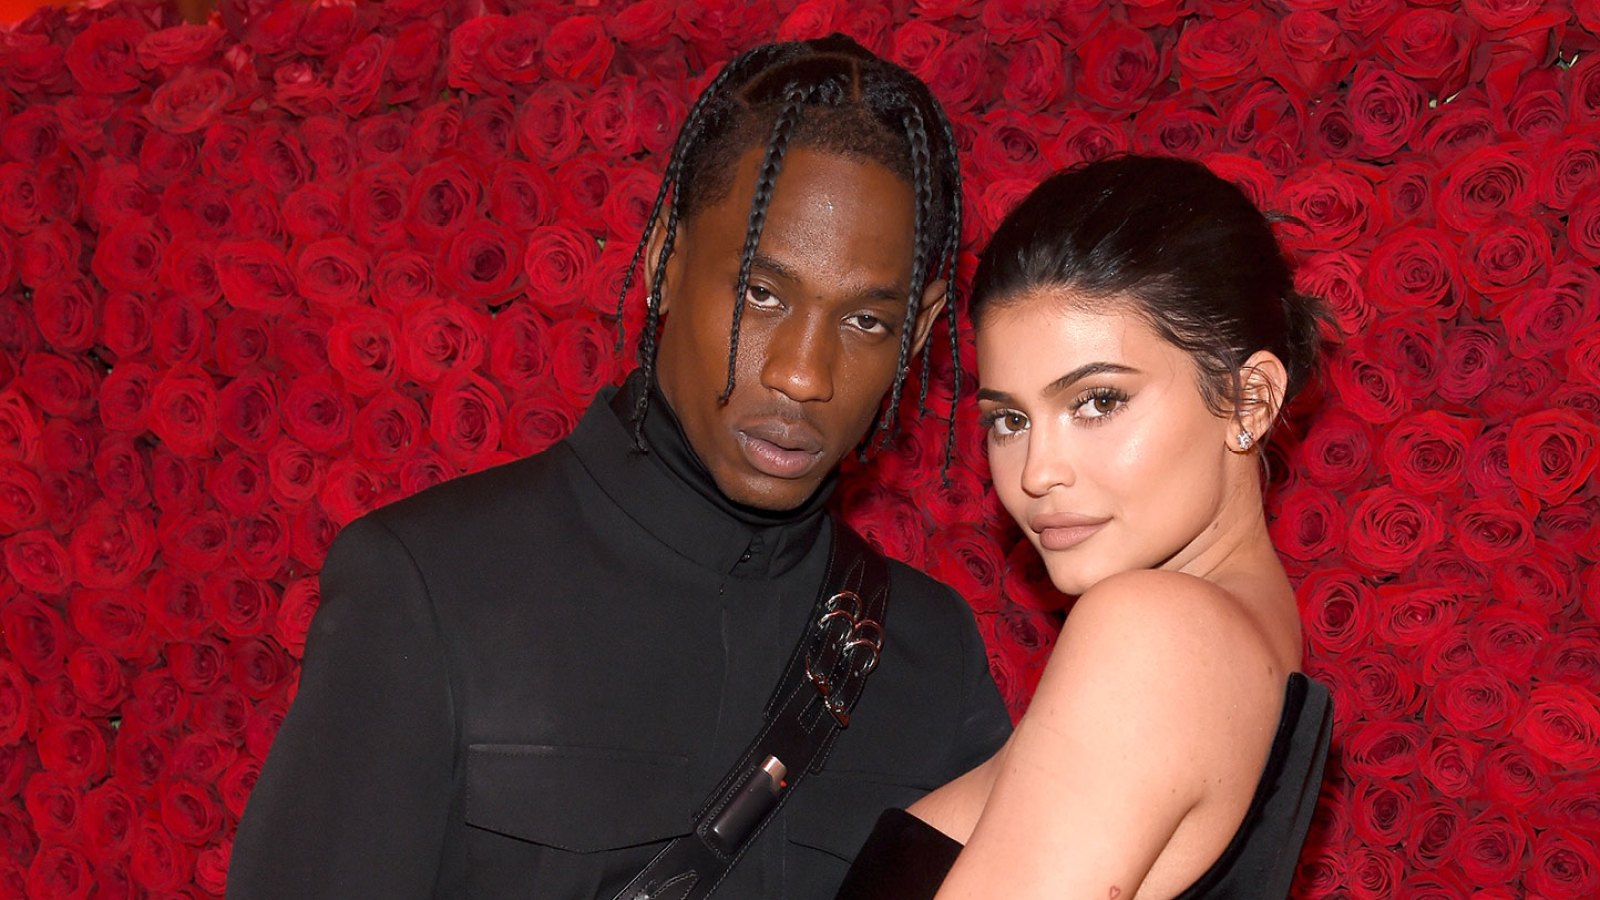 Kylie Jenner and Travis Scott Got Into a ‘Big Fight’ Amid Cheating Rumors